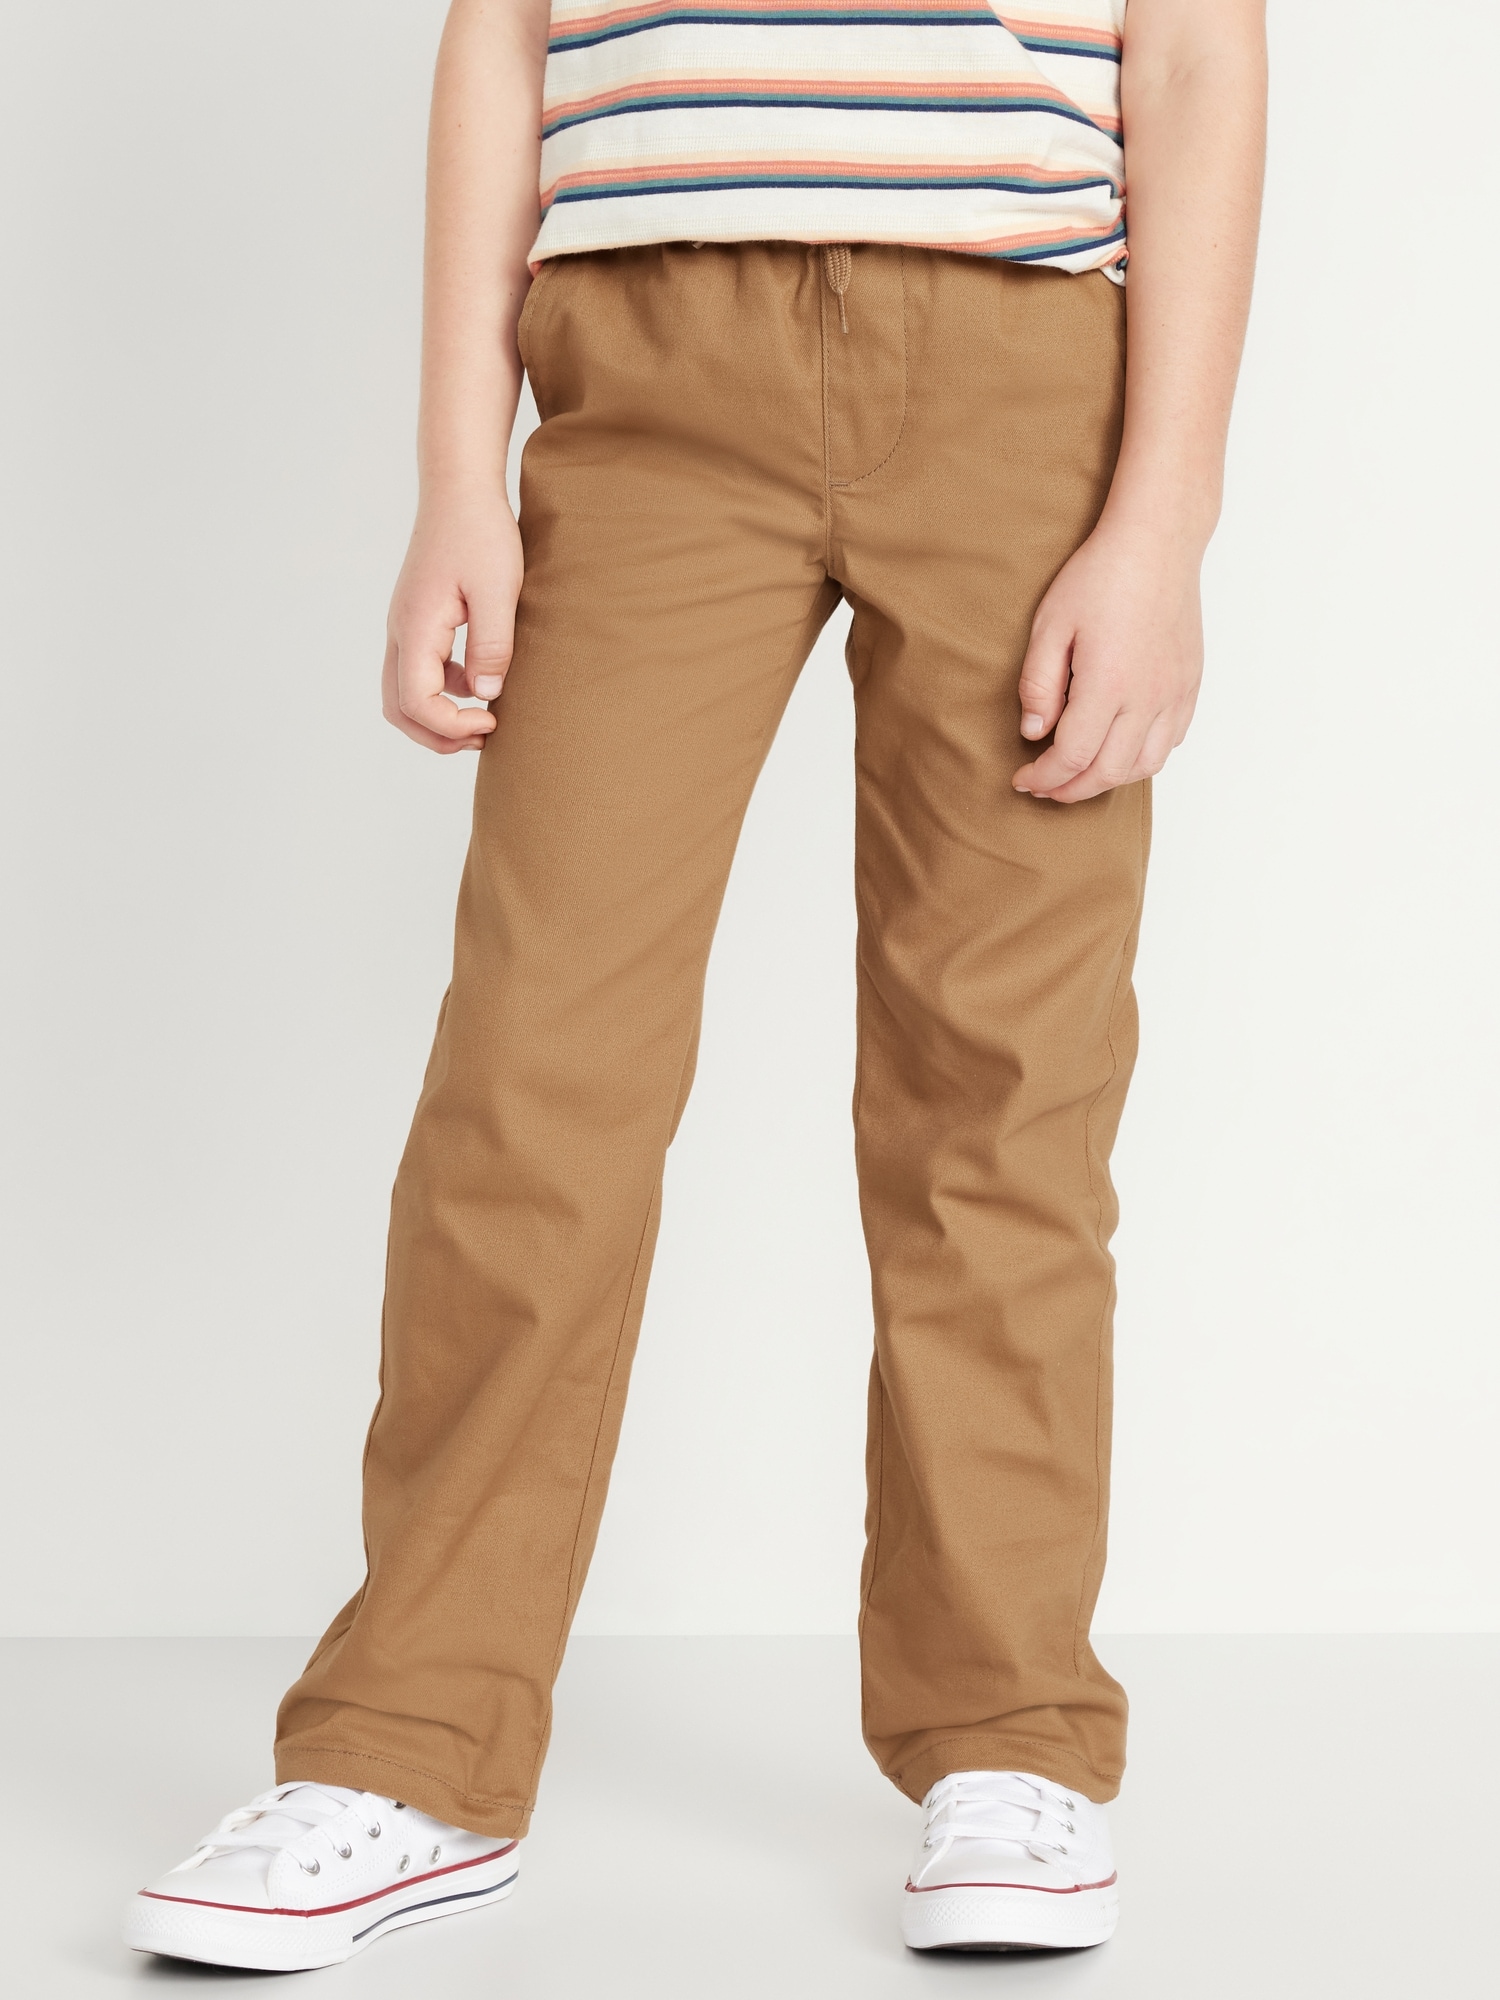 Old Navy Built-In-Flex Pants 34x34 Brown Twill Straight Stretch Flat Front